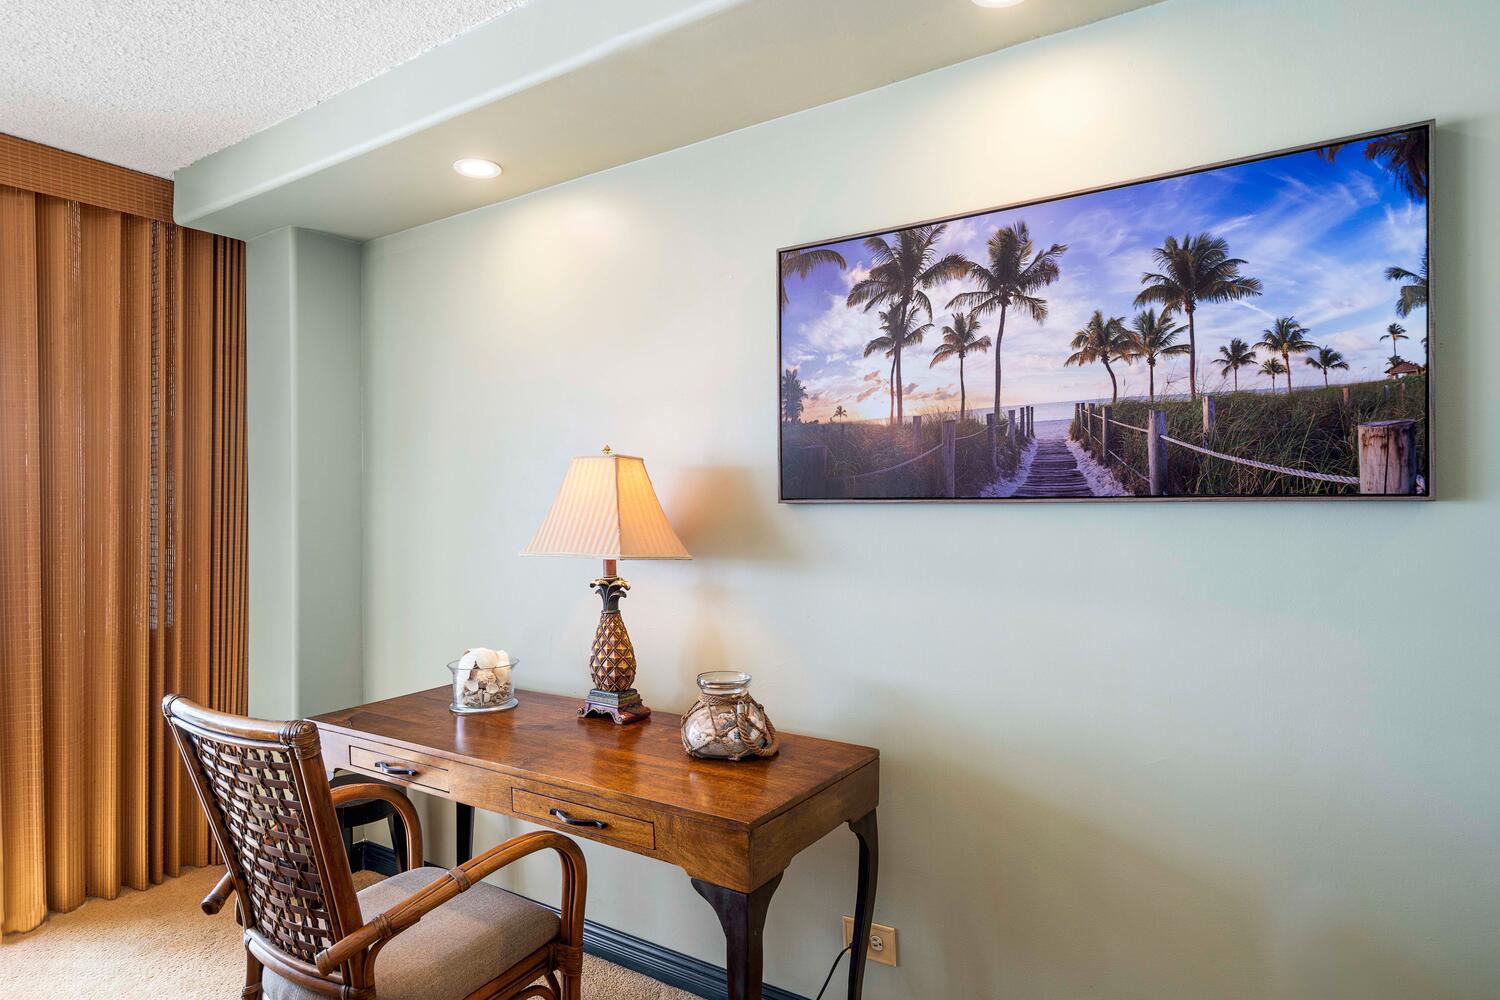 Kailua Kona Vacation Rentals, Kona Alii 302 - Cozy nook with a desk, can be used as a home office or writing a travel journal.